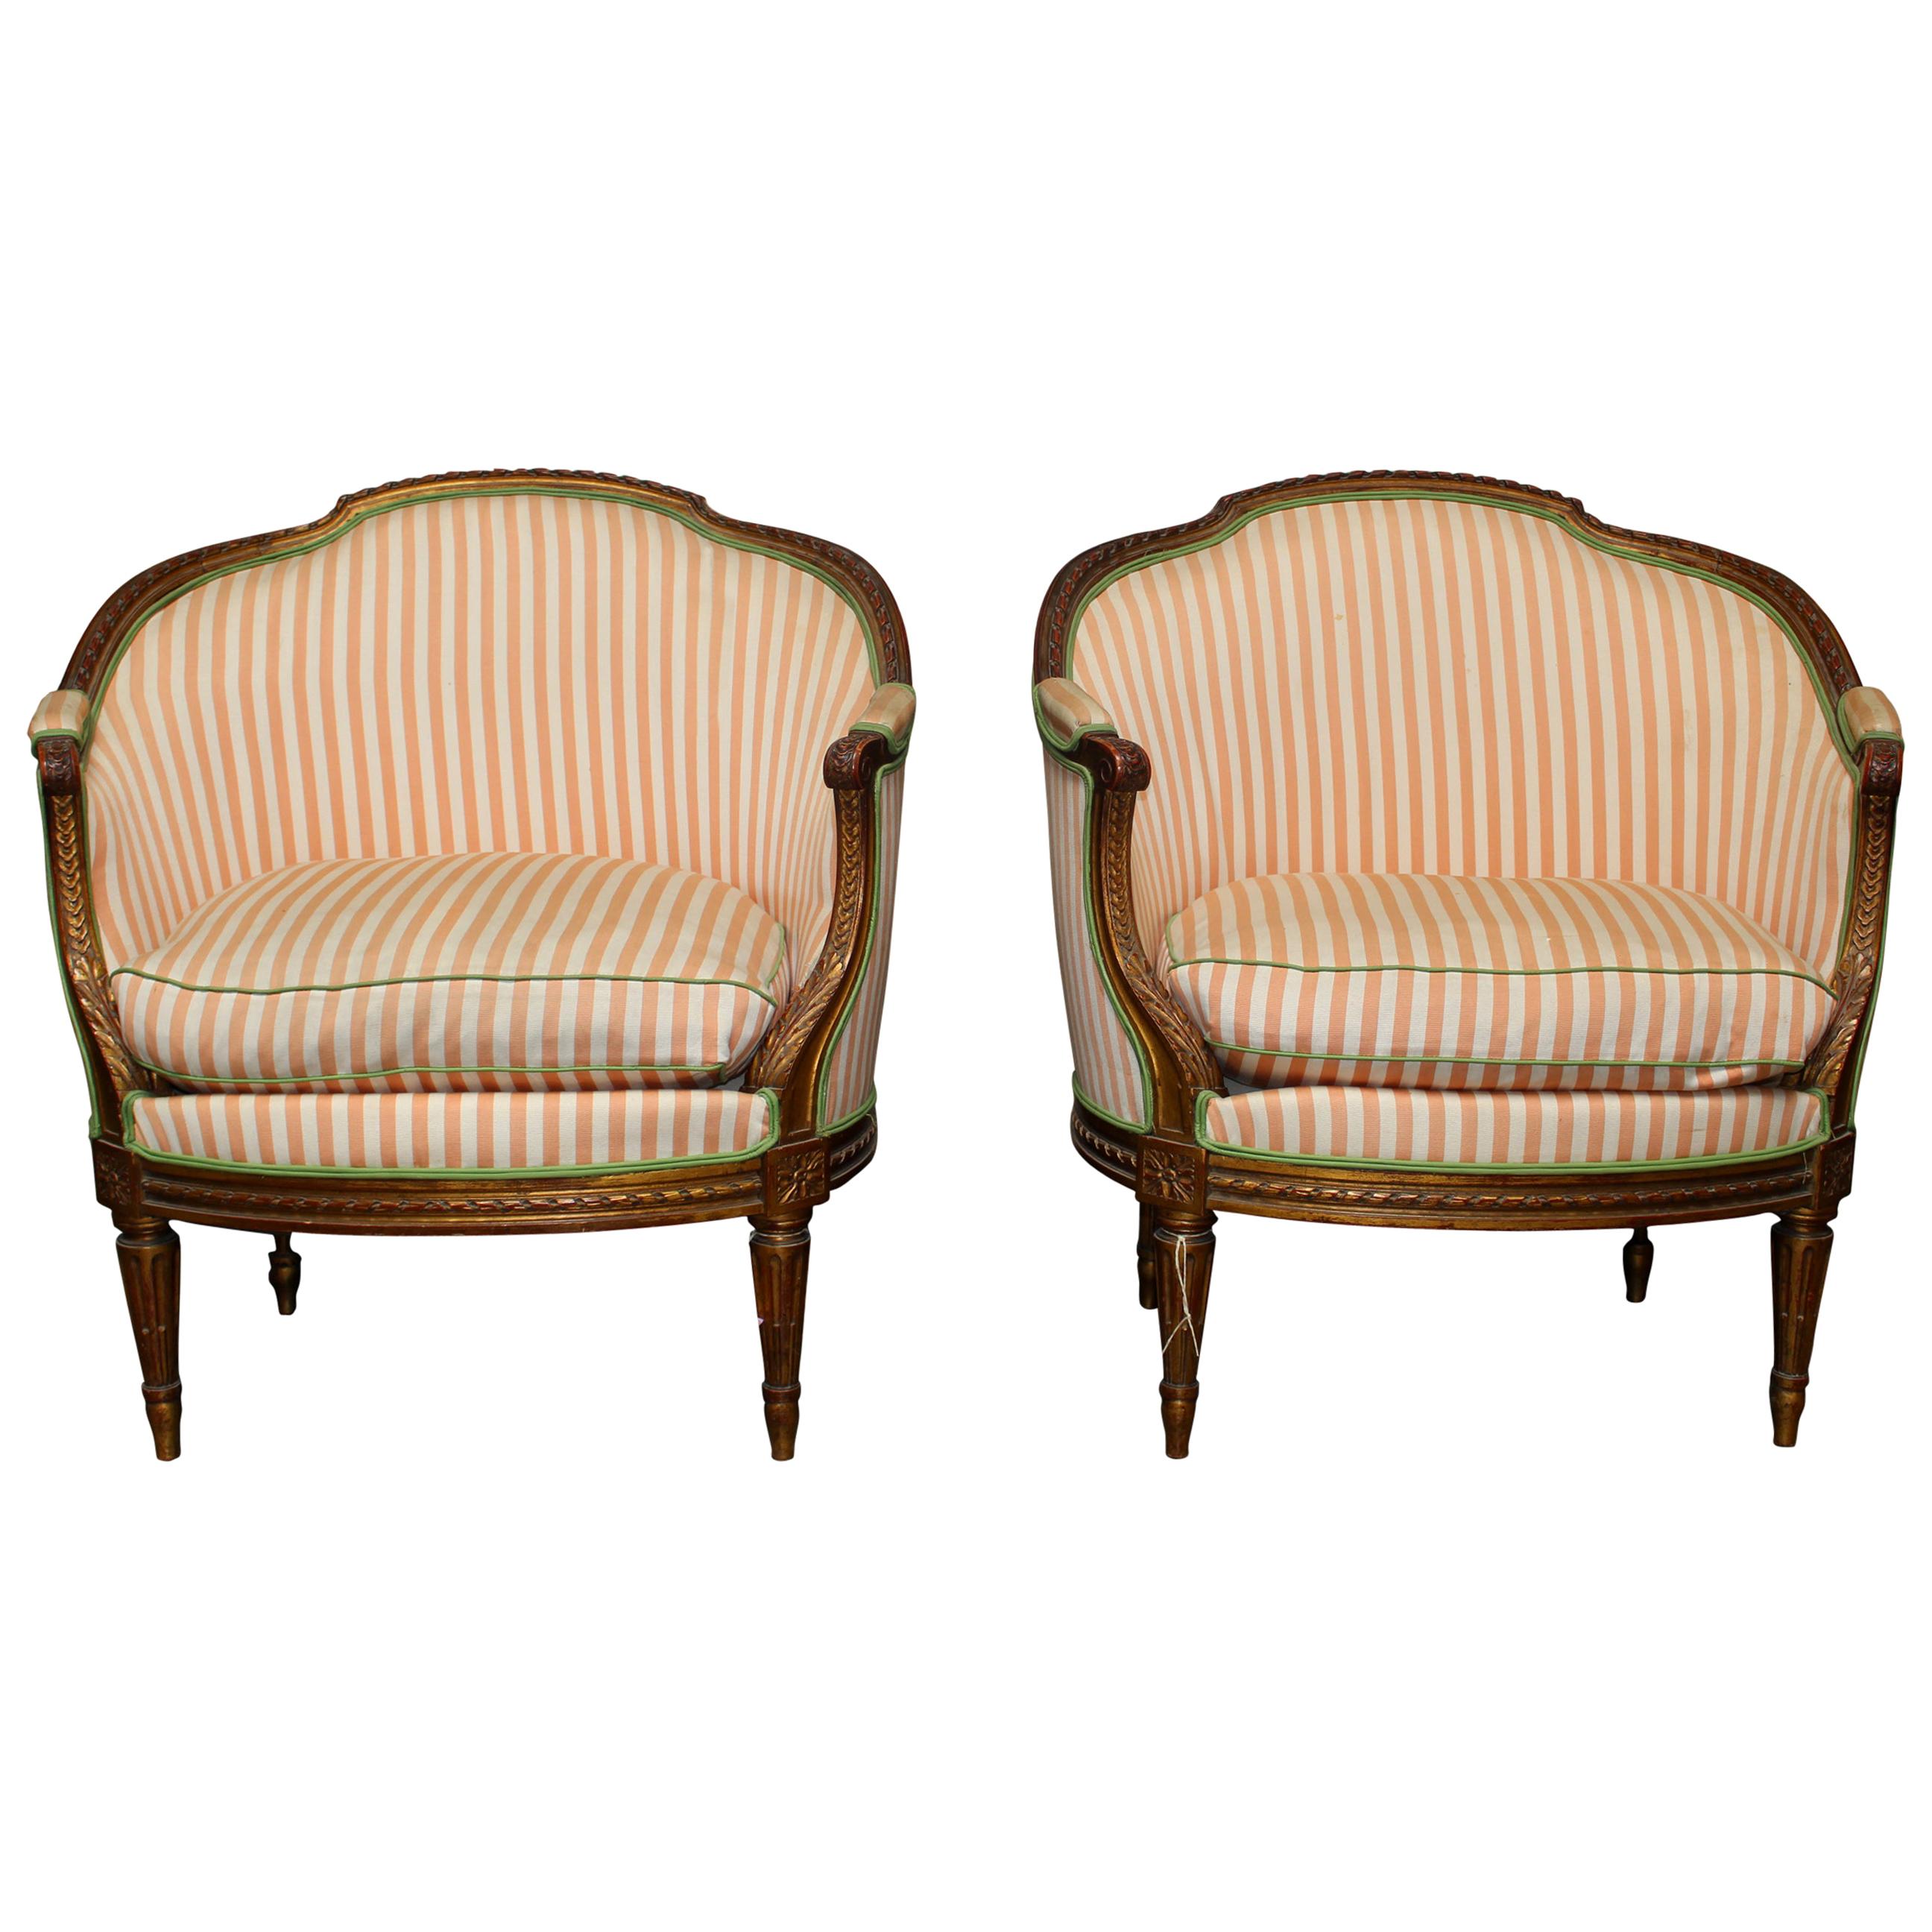 Pair of 19th Century French Louis XVI Style Armchairs with a Gold Leaf Finish